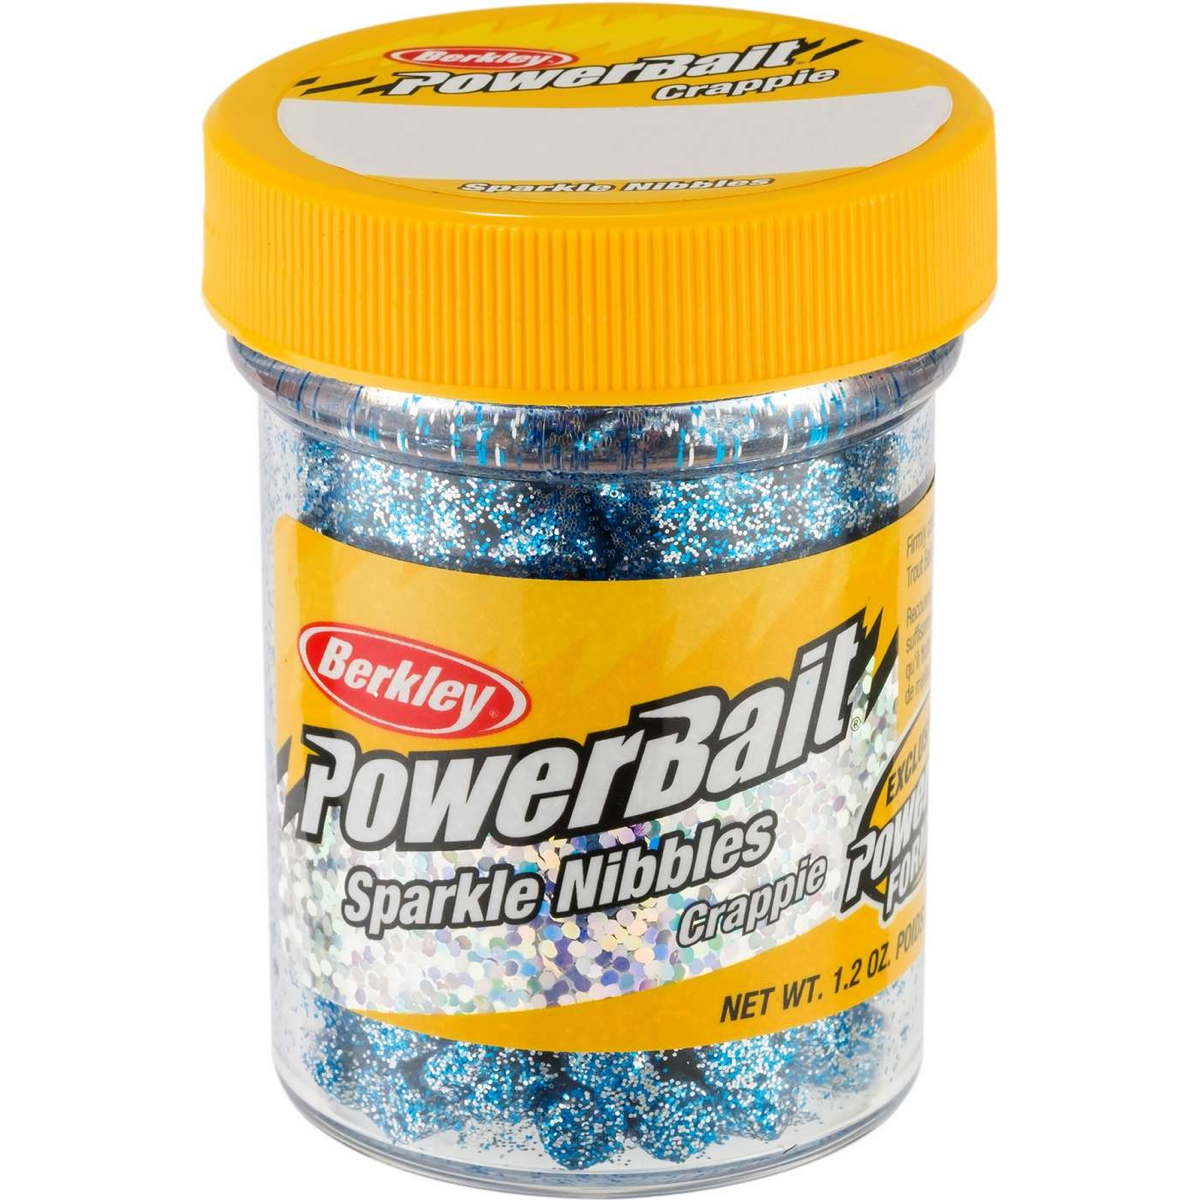 Photo of Berkley PowerBait Sparkle Crappie Nibbles for sale at United Tackle Shops.